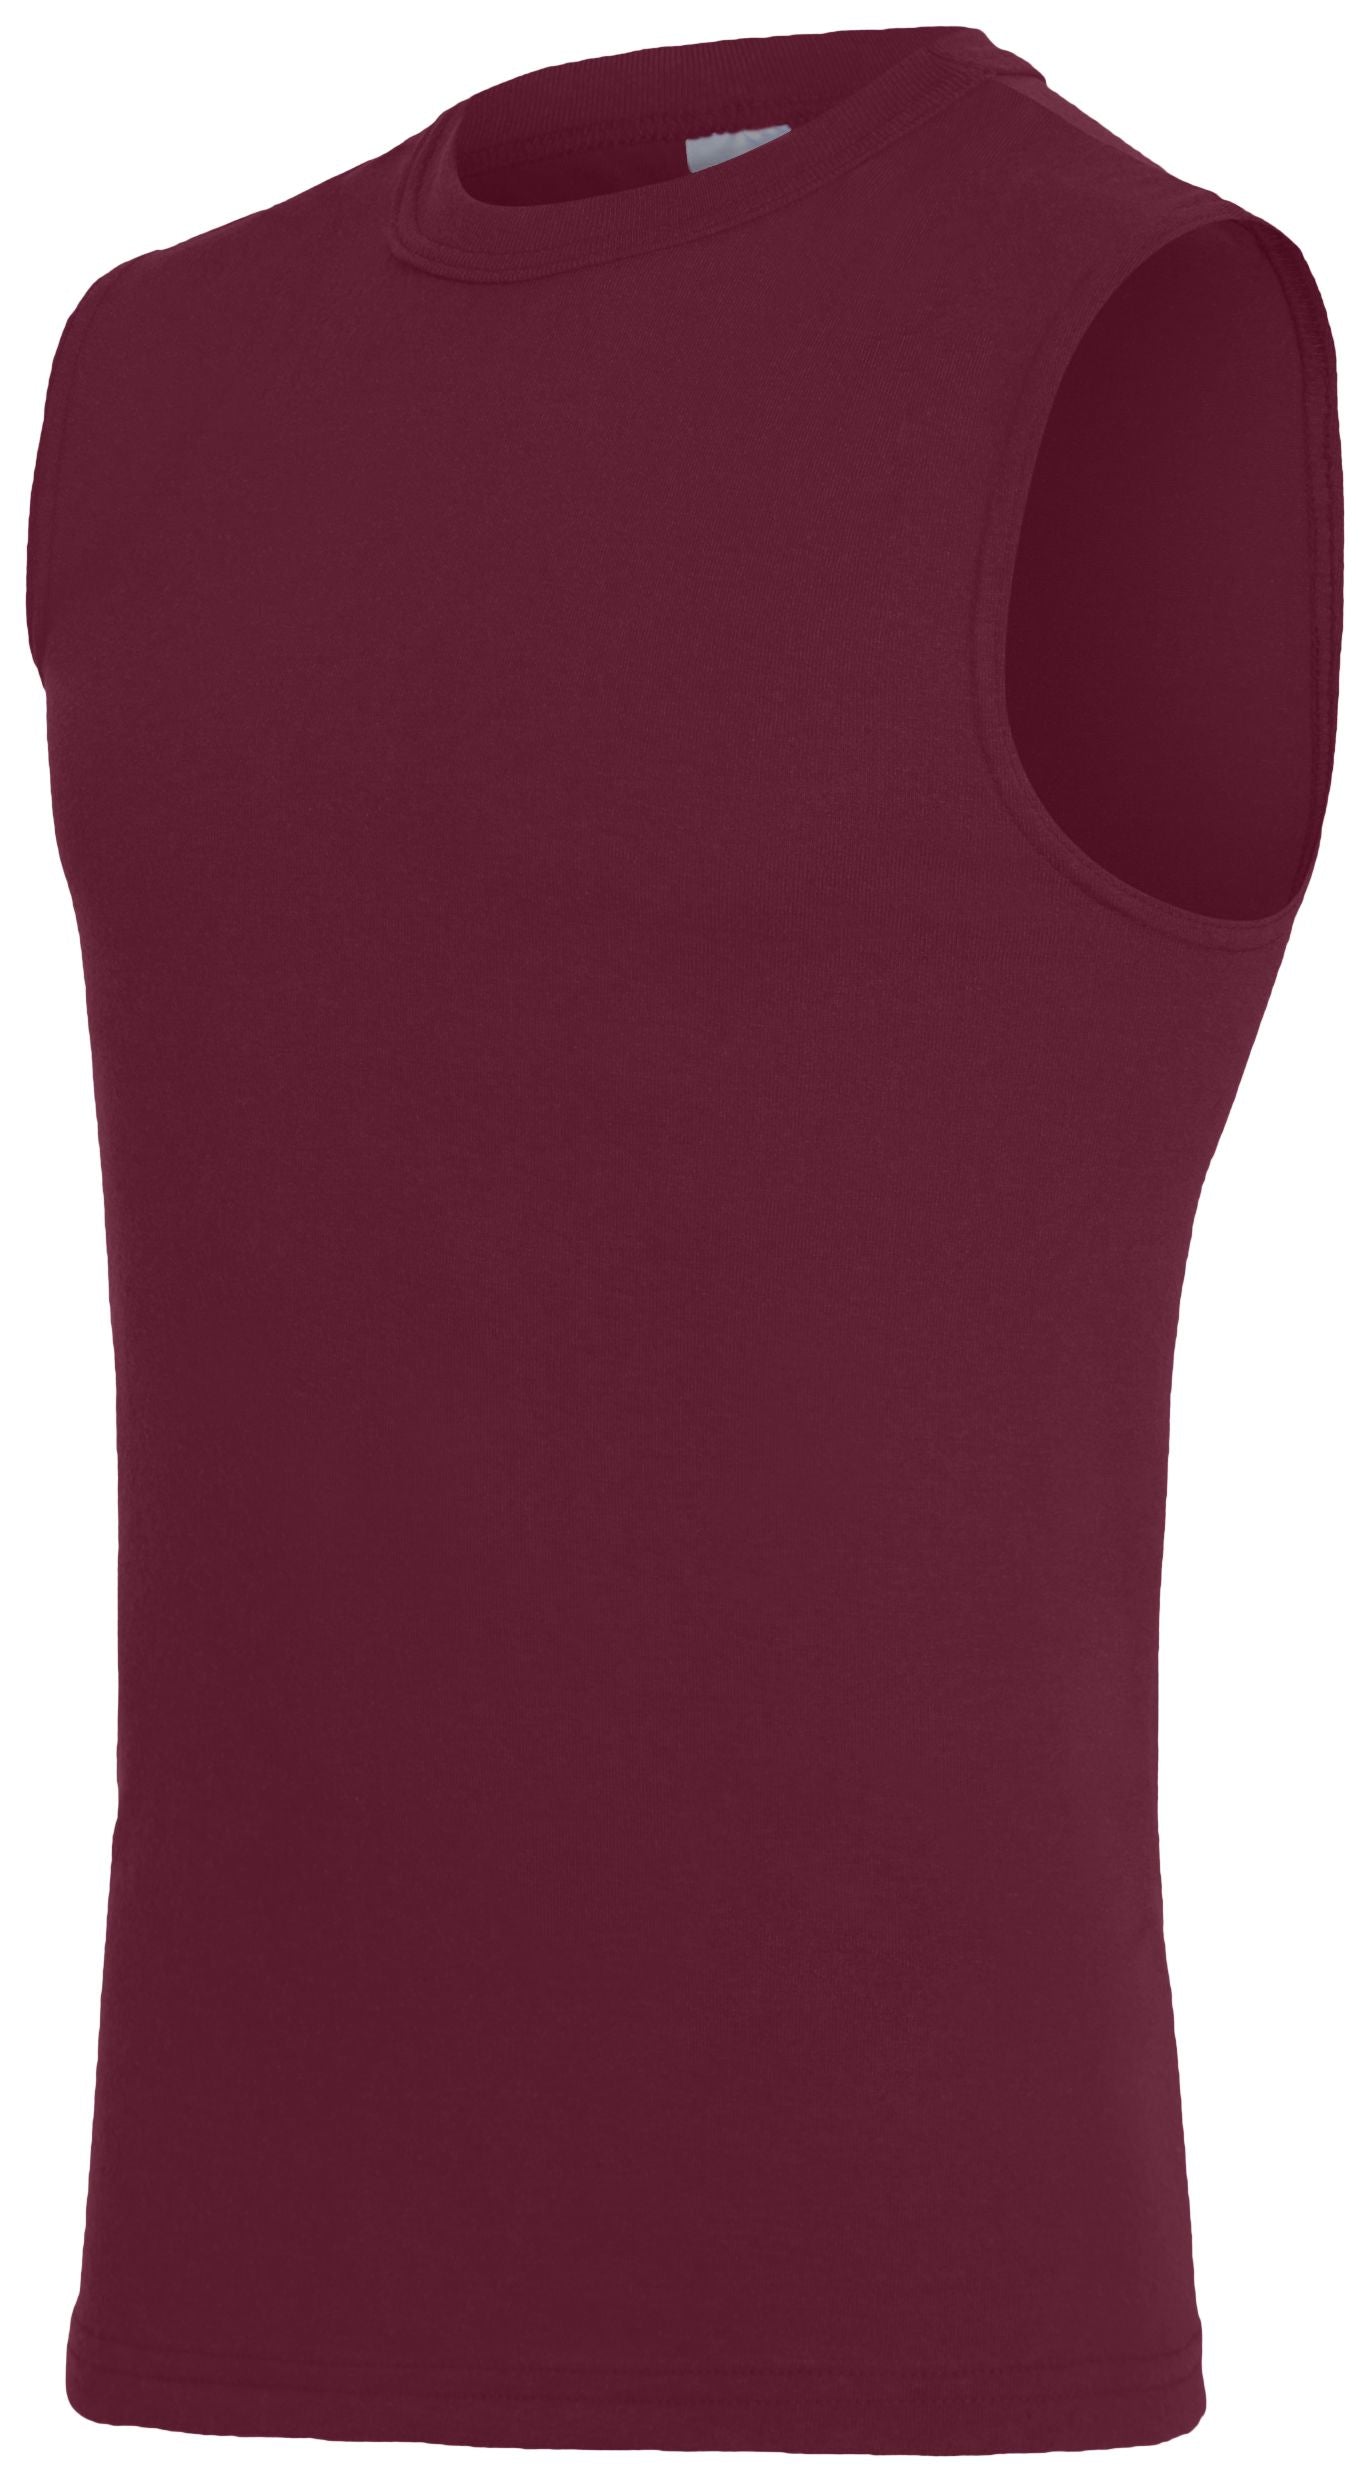 Augusta Sportswear Youth Shooter Shirt in Maroon  -Part of the Youth, Youth-Jersey, Augusta-Products, Shirts product lines at KanaleyCreations.com